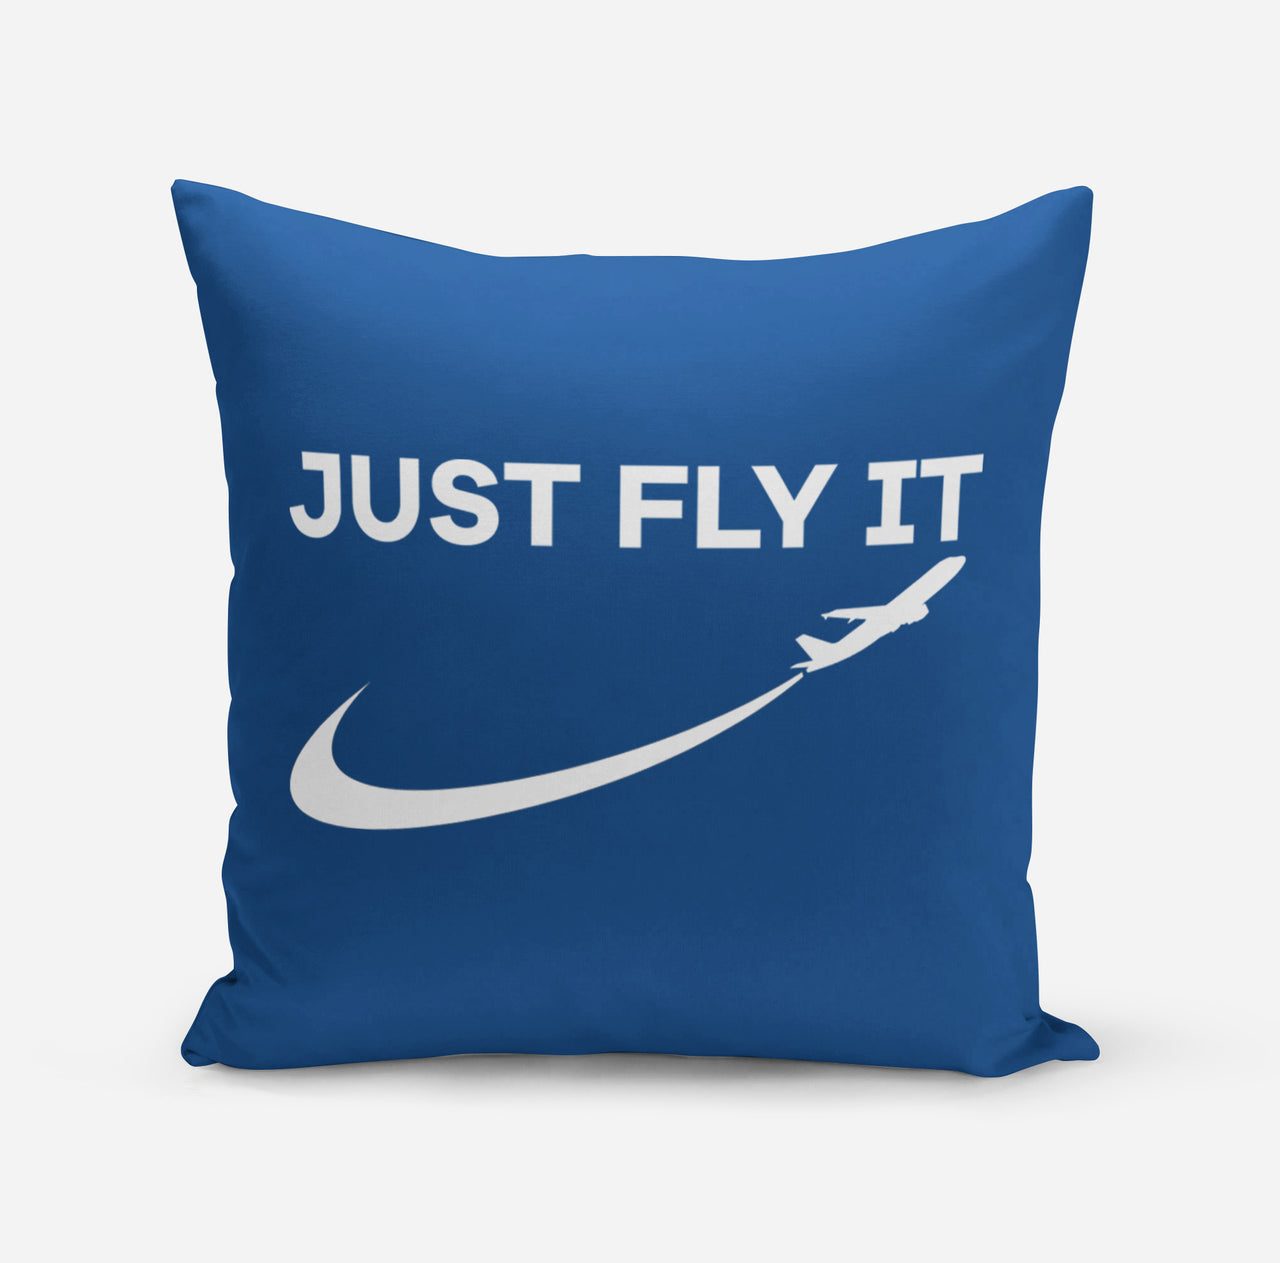 Just Fly It 2 Designed Pillows